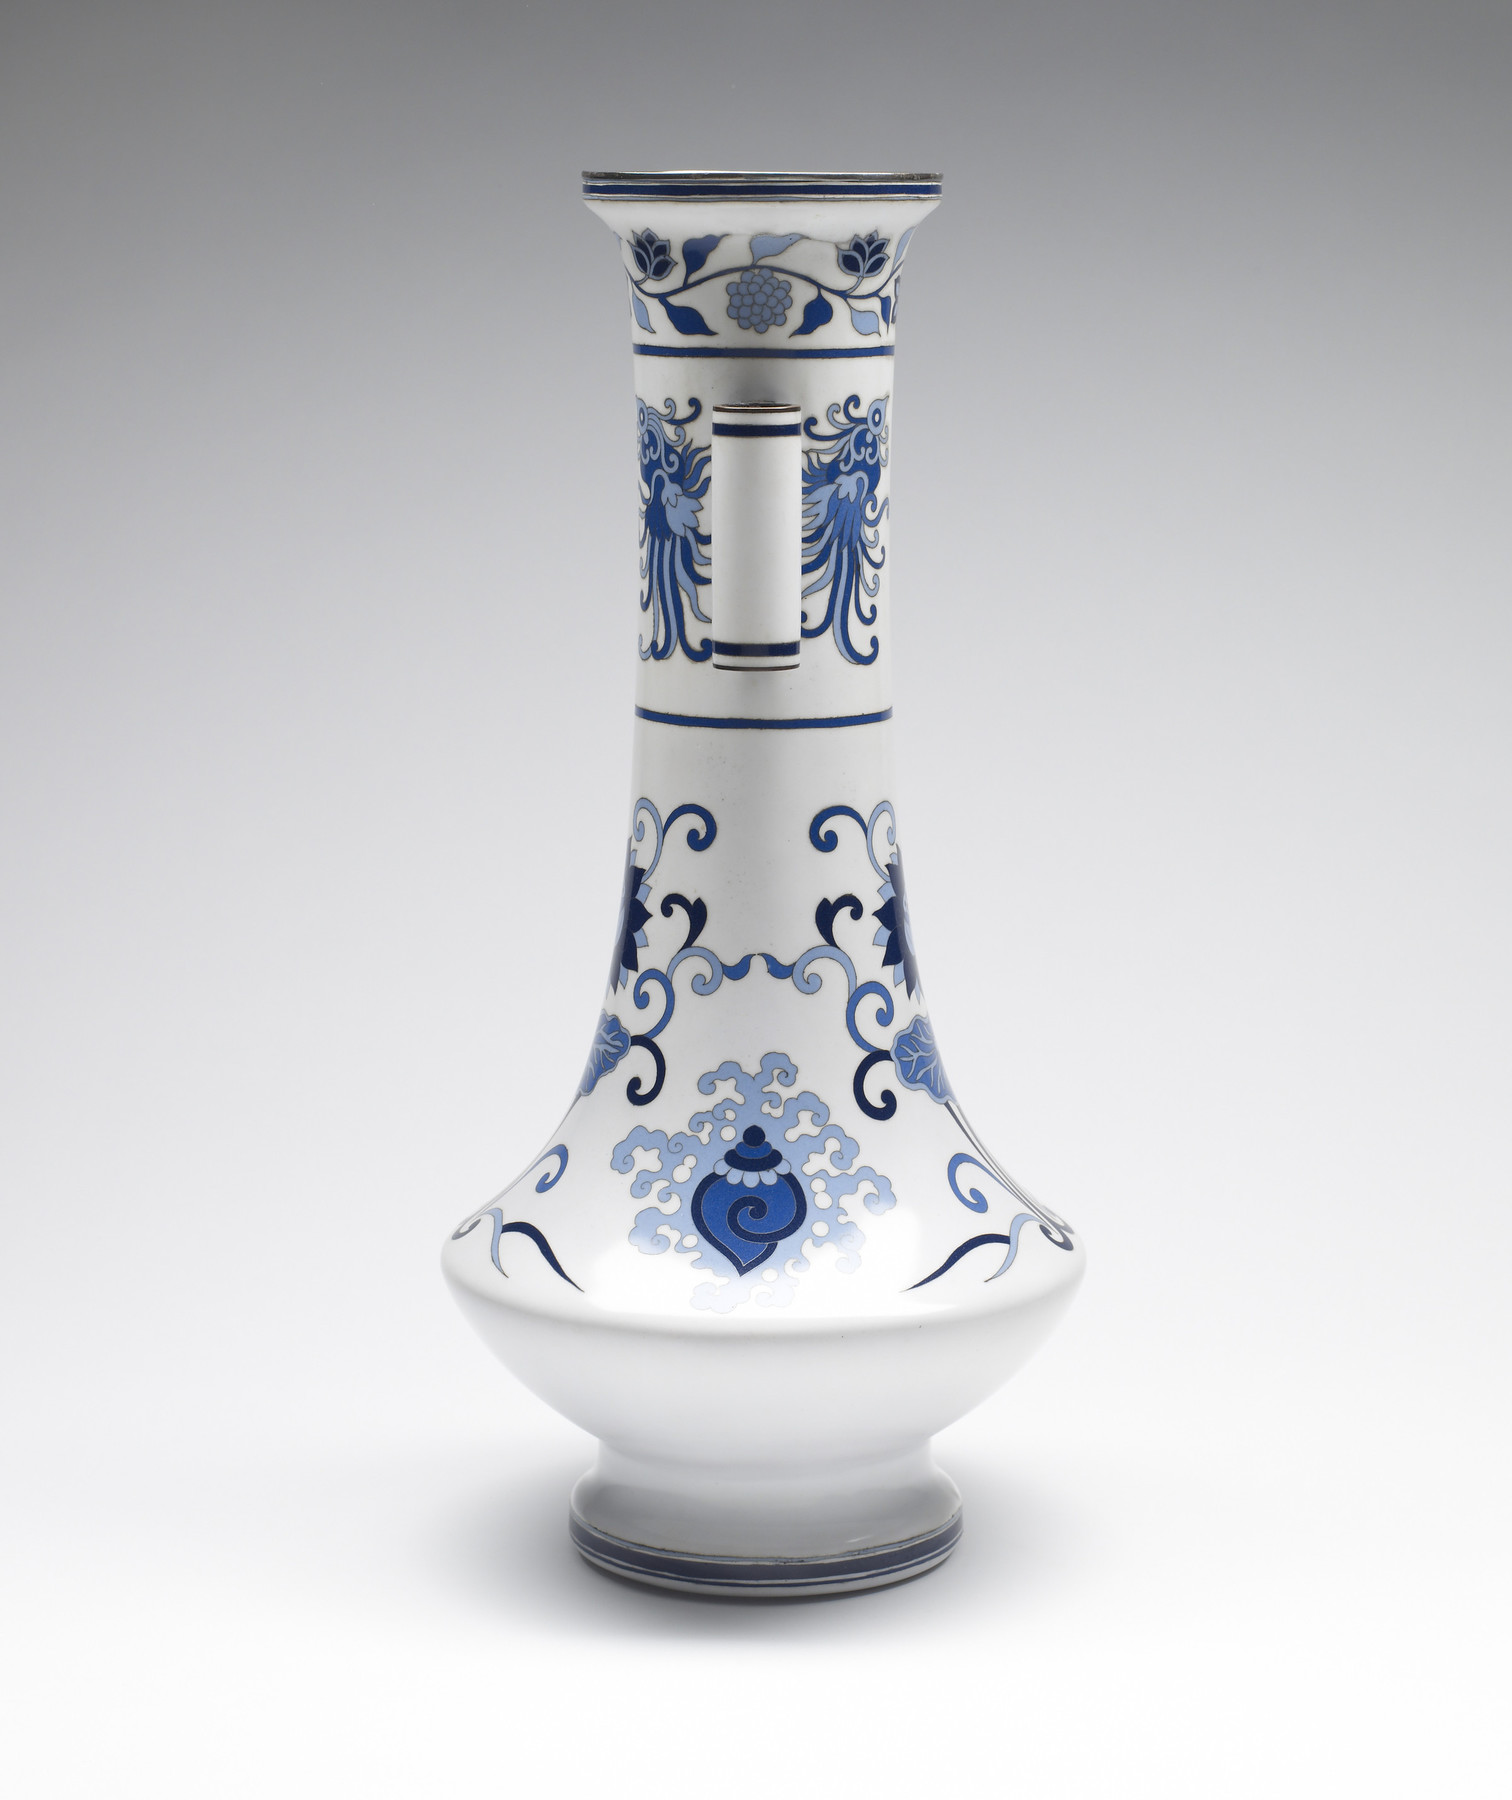 Image for One of a Pair of Vases Decorated with Blue and White Ceramic Designs